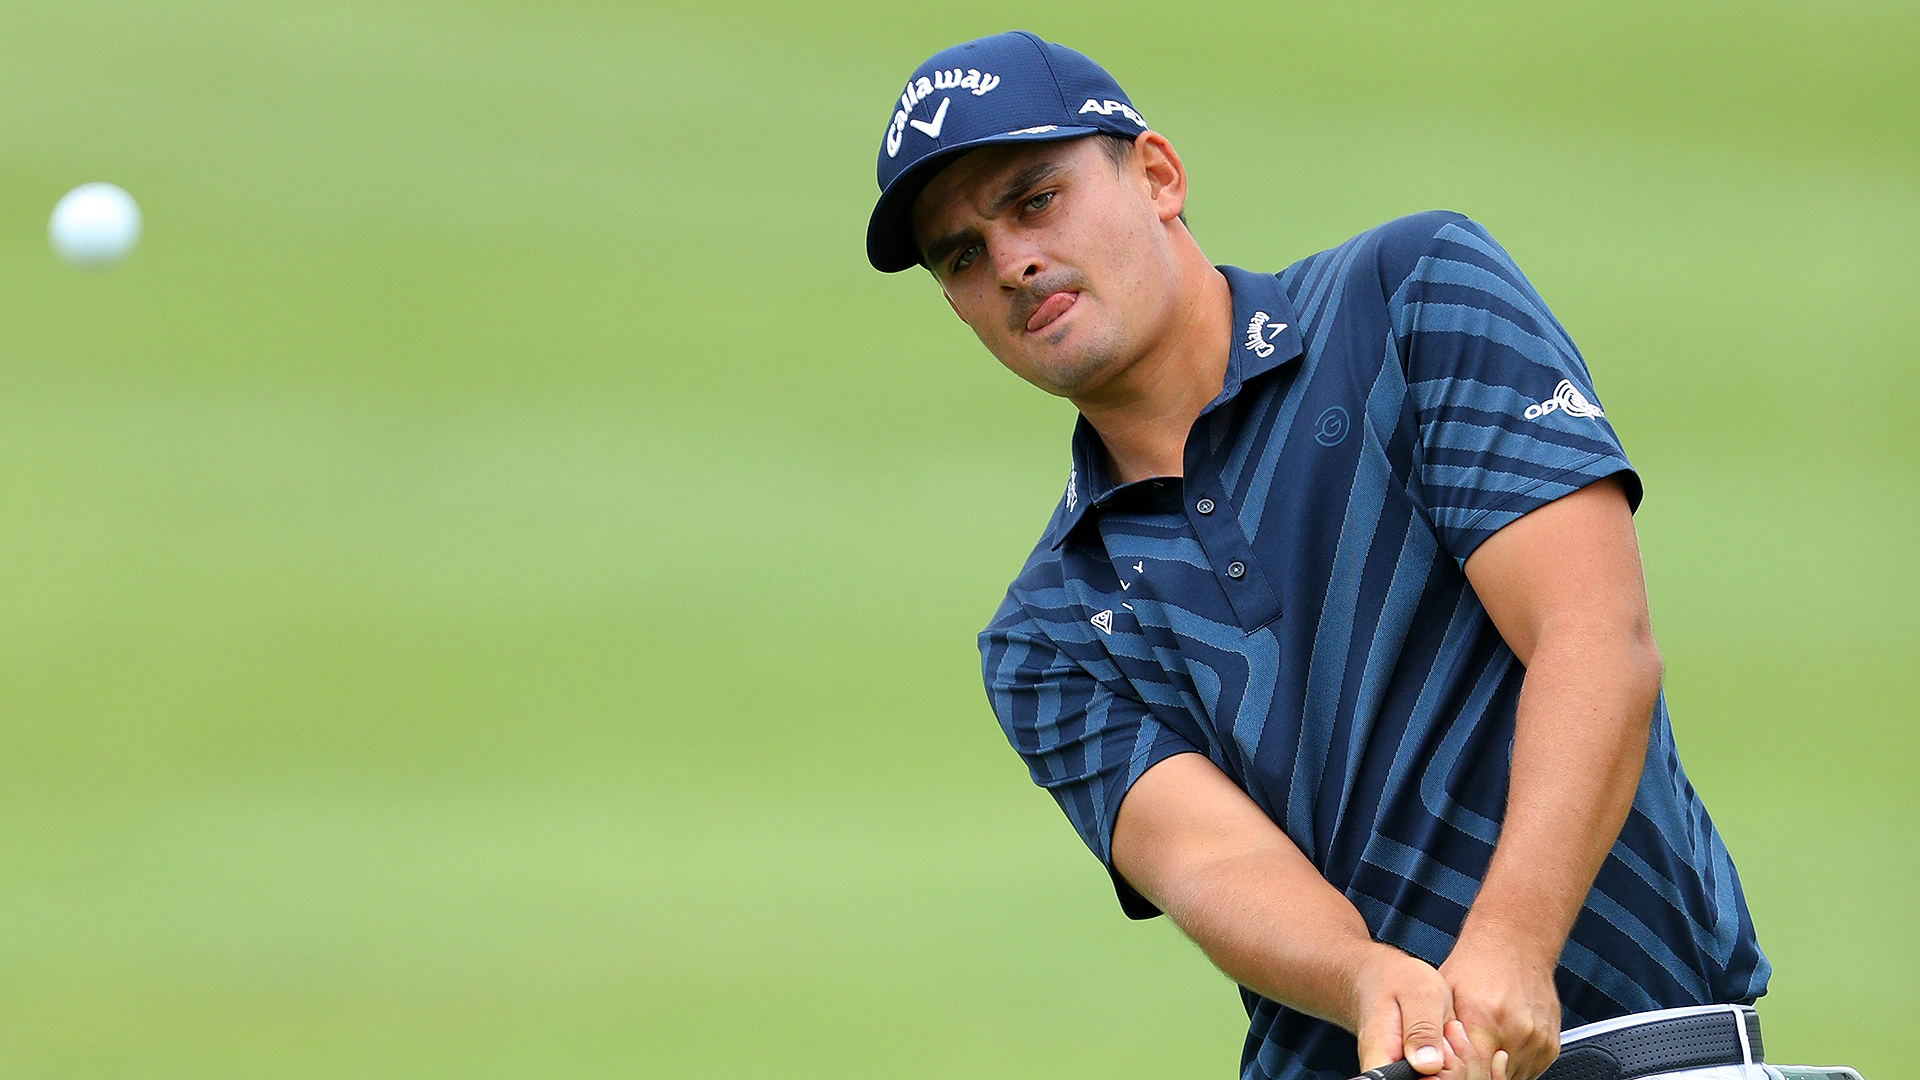 In bid for back-to-back wins, Christiaan Bezuidenhout leads South African Open